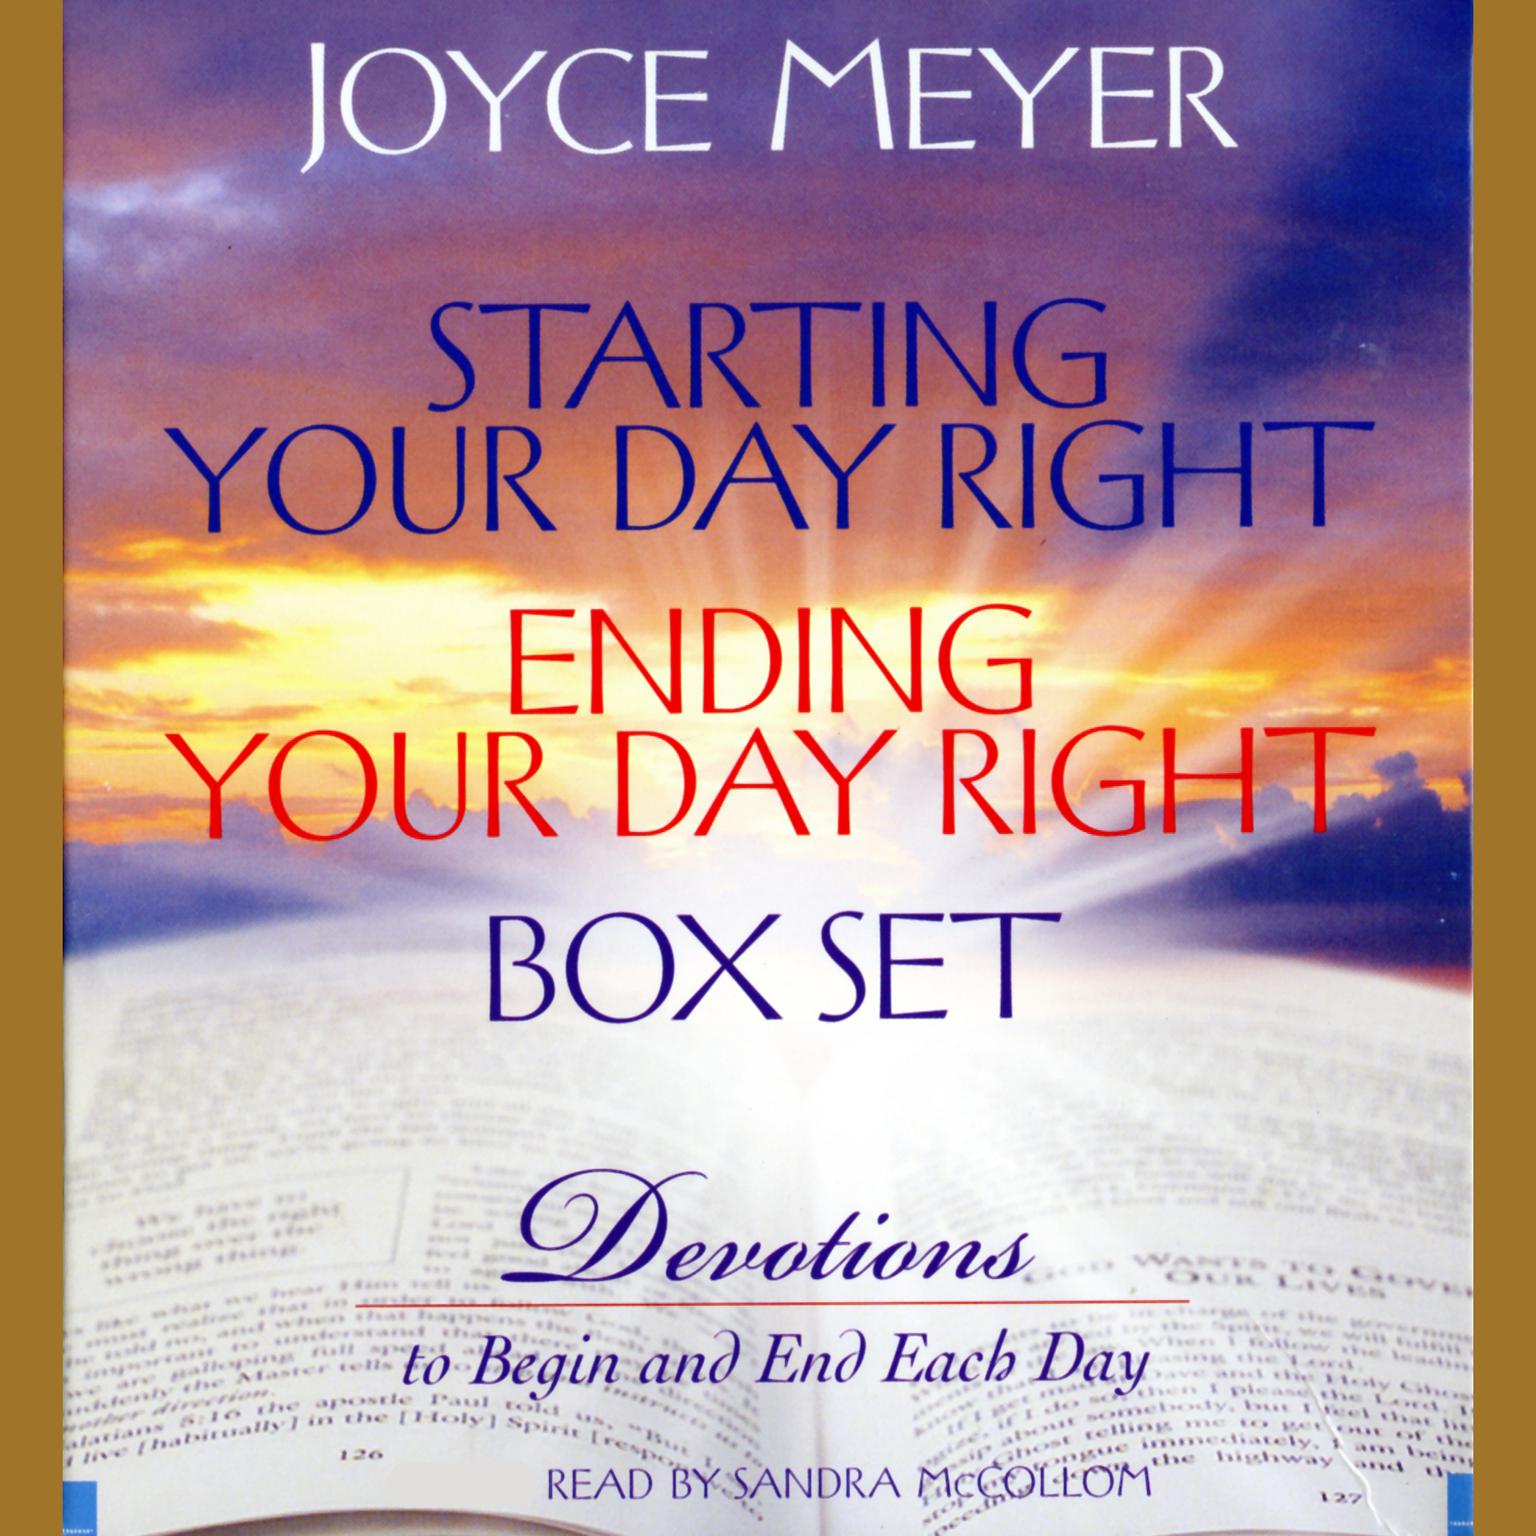 Starting Your Day Right/Ending Your Day Right Box Set (Abridged): Devotions to Begin and End Each Day Audiobook, by Joyce Meyer